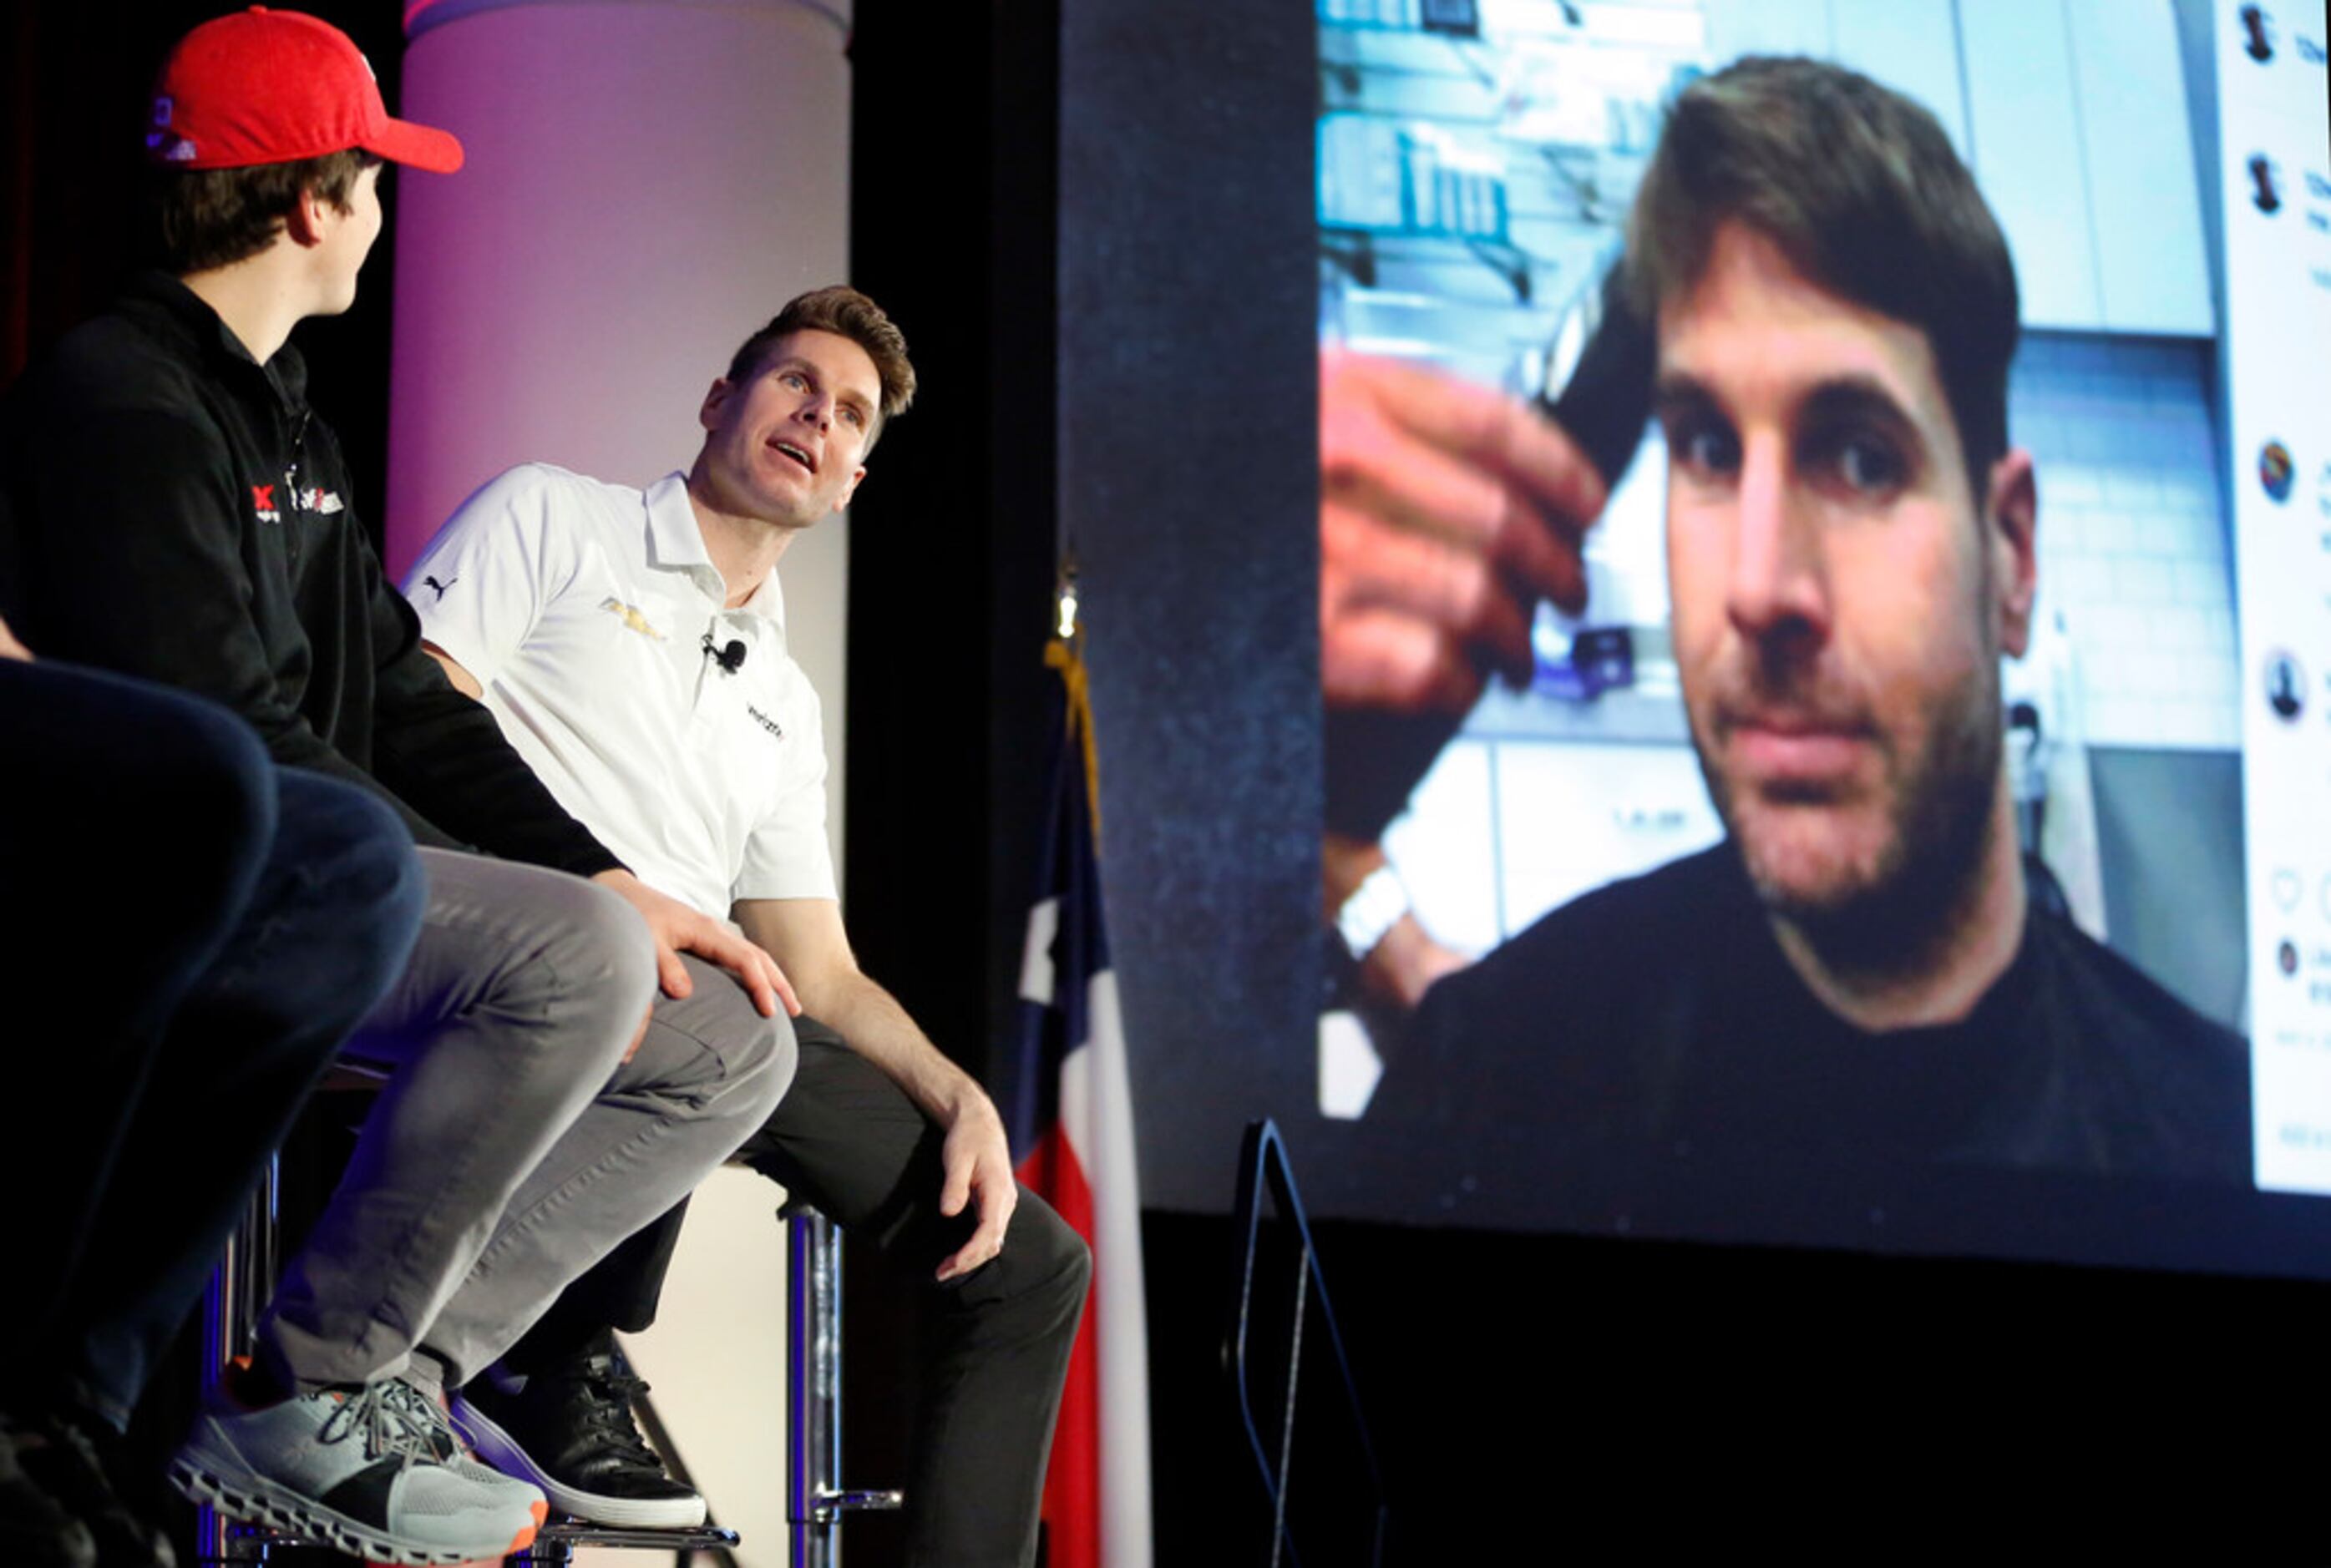 IndyCar driver Will Power shows off his well groomed hair after a social media post of his...